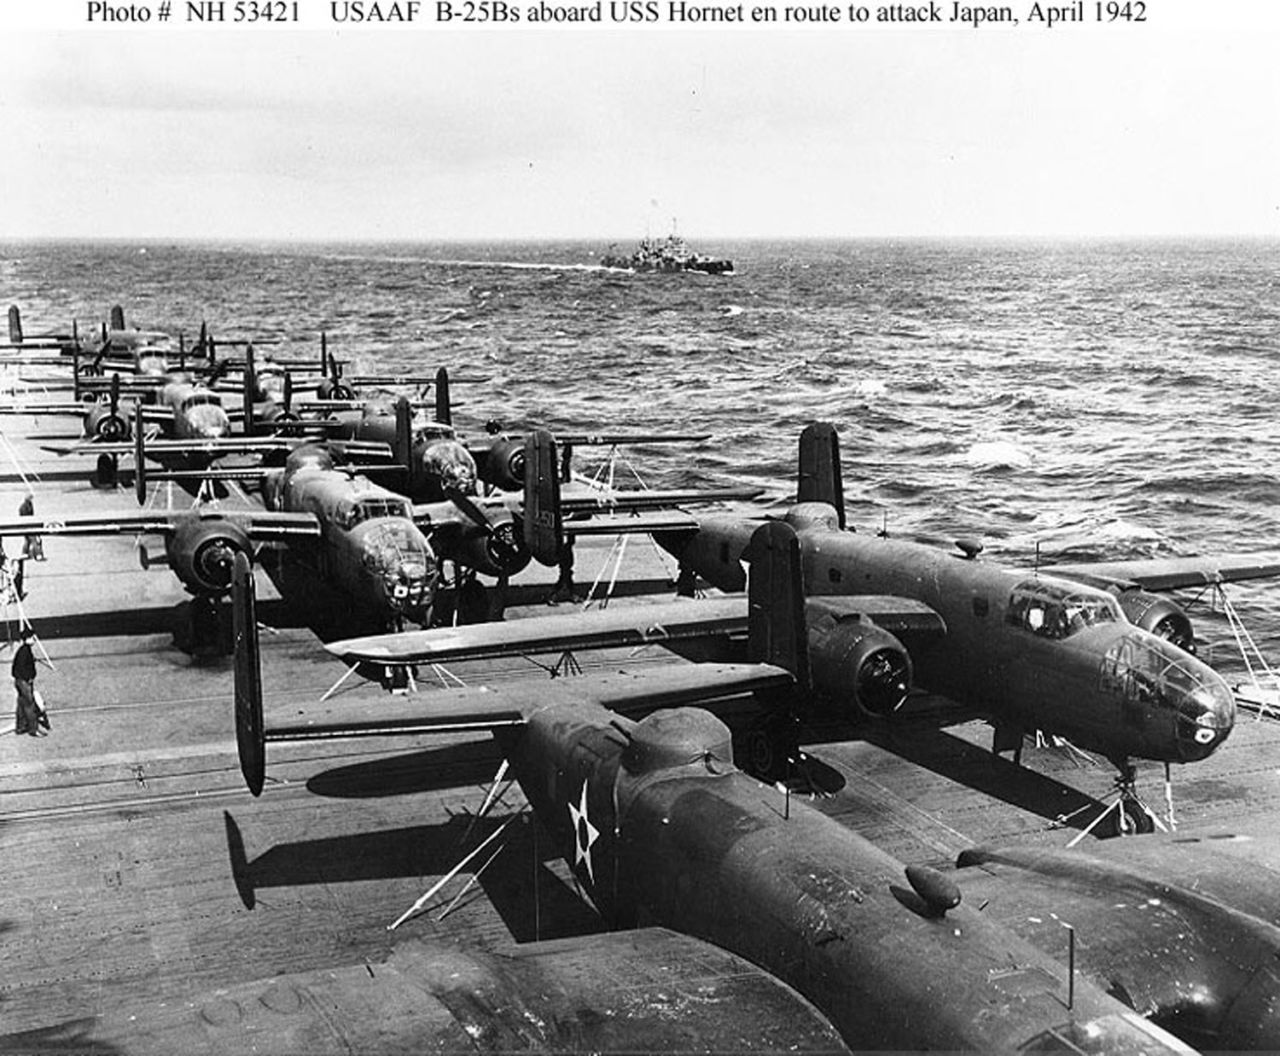 As revenge for Japan's attack on Pearl Harbor, 80 US pilots, gunners, navigators and bombardiers led by Lt. Col. James "Jimmy" Doolittle performed a daring one-way mission to bomb Japan in 1942. Half of the mission's 16 North American B-25 Mitchell bombers are seen here parked on the flight deck of the USS Hornet. Click through the gallery to see more images of the raid.